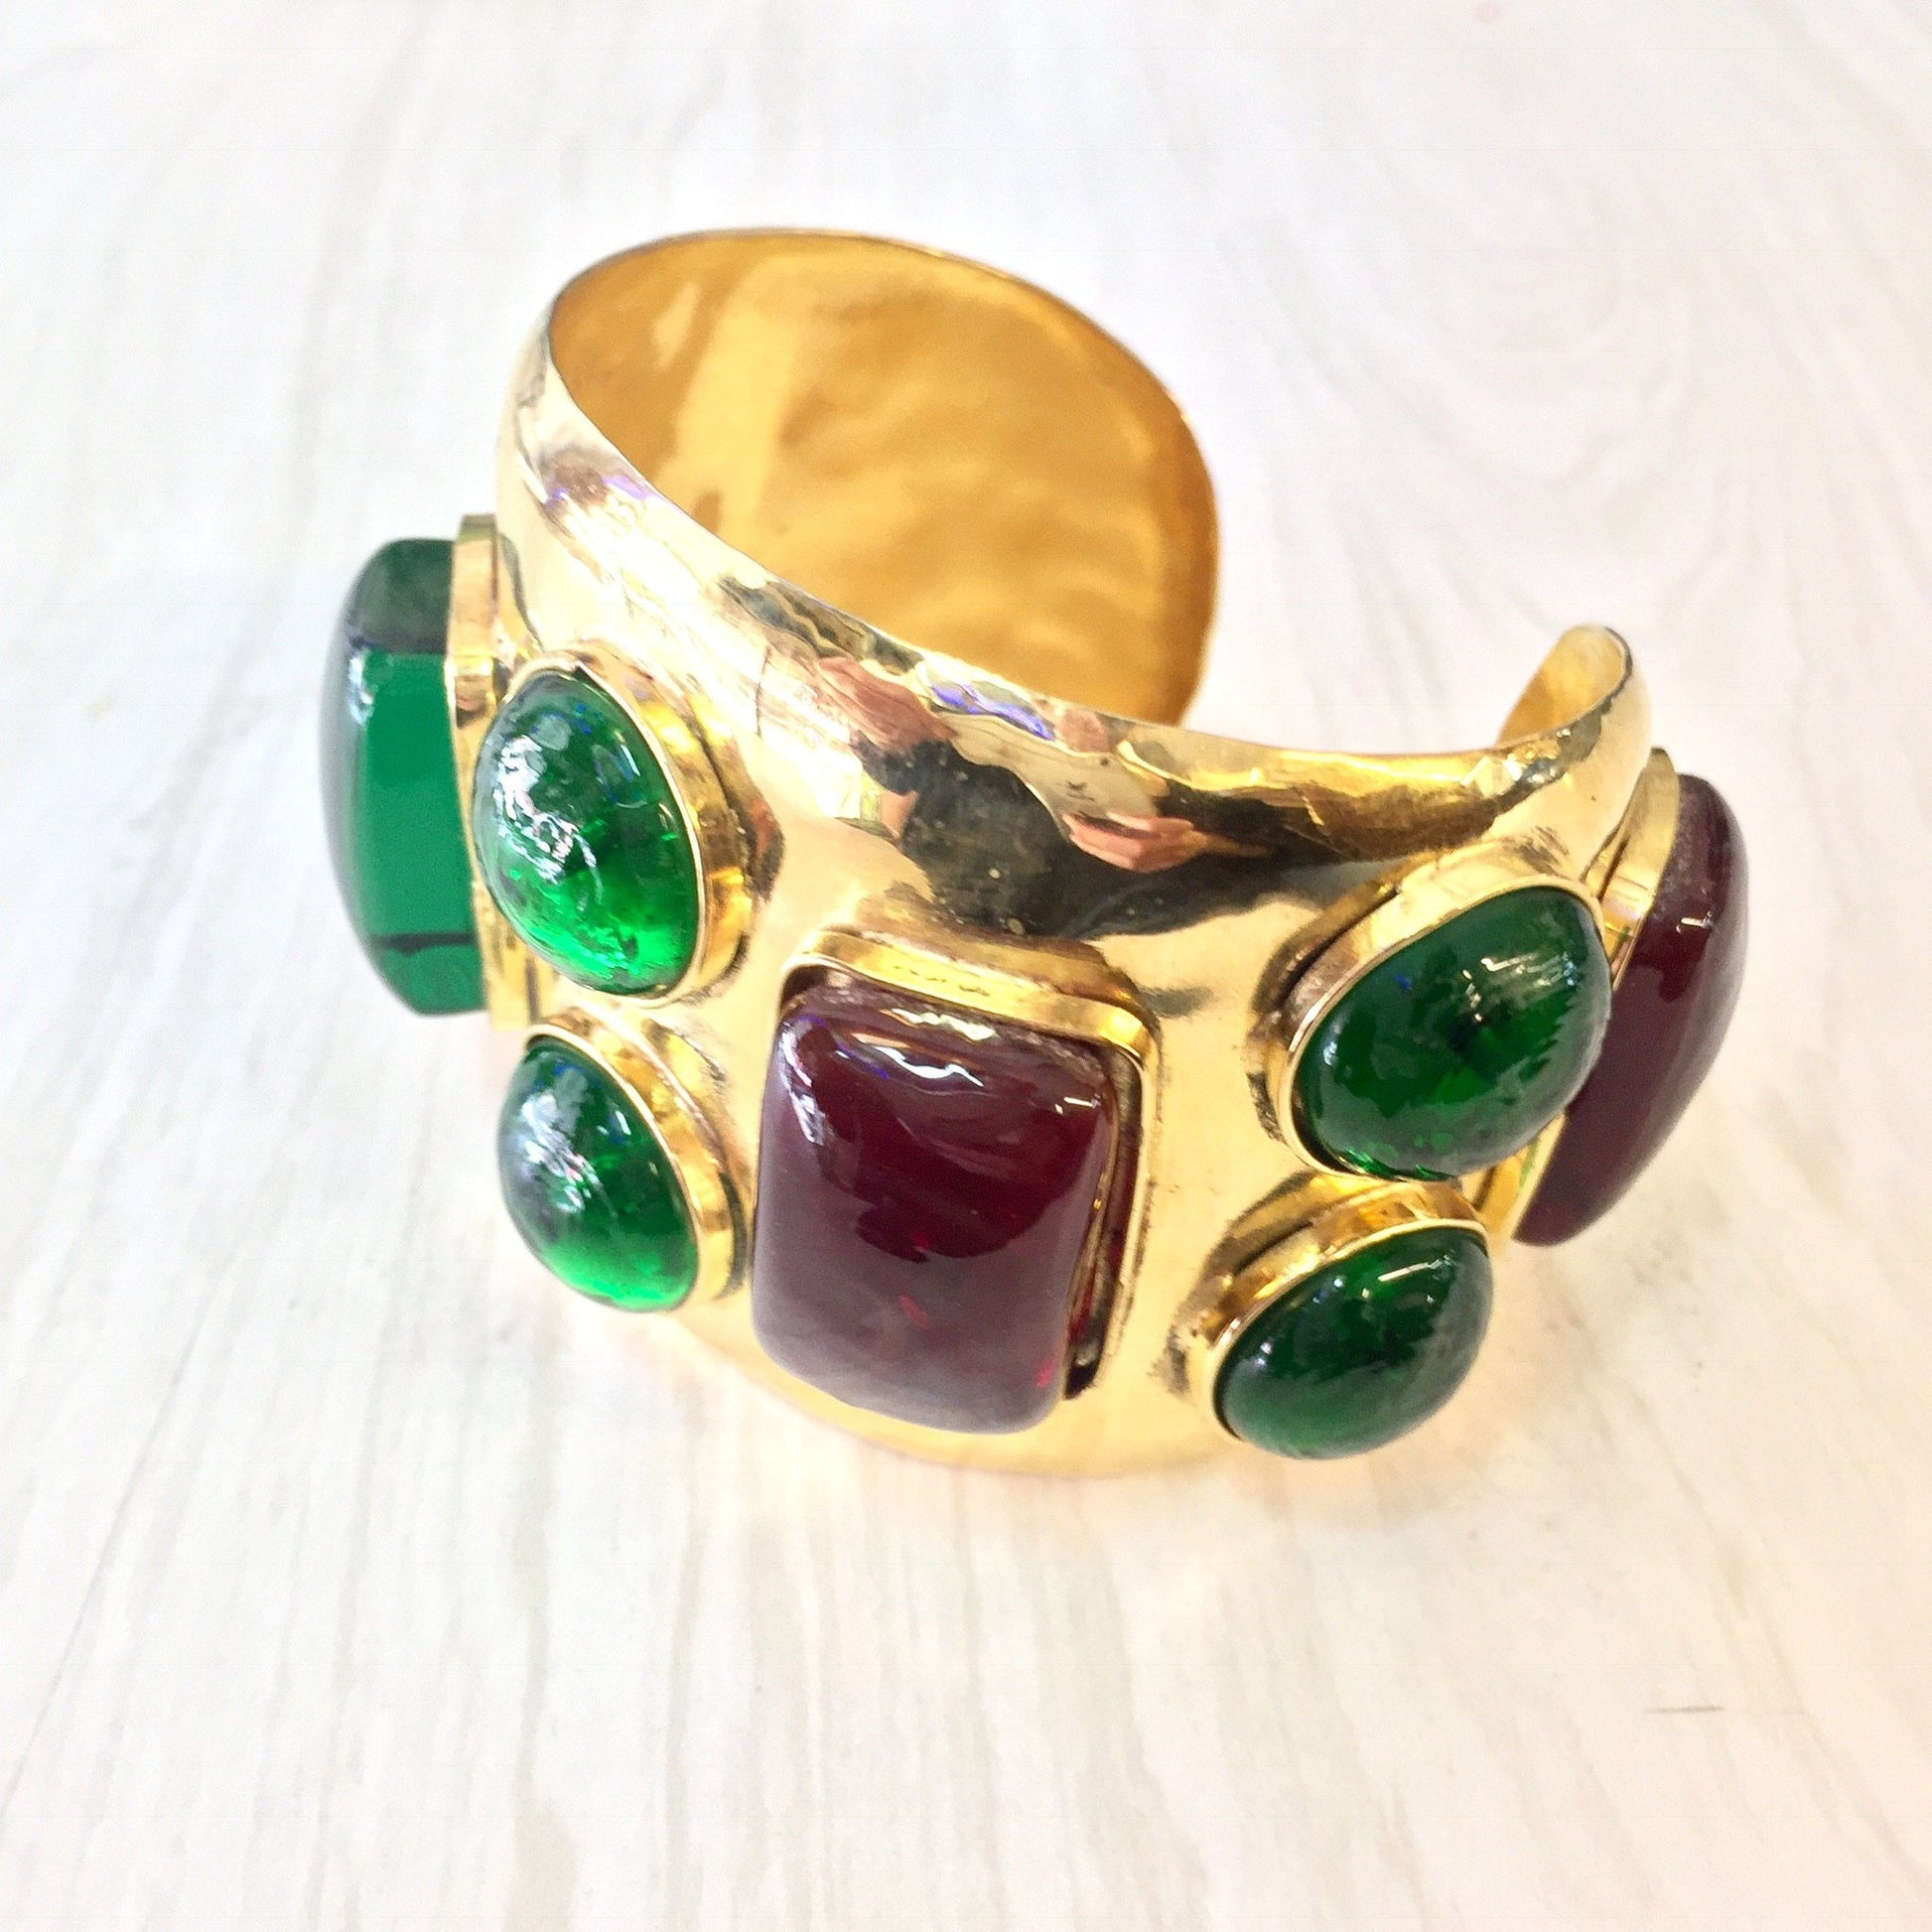 Gold toned vintage cuff bracelet with red and green gemstone-like beads, creating a bold and colorful statement piece of jewelry.